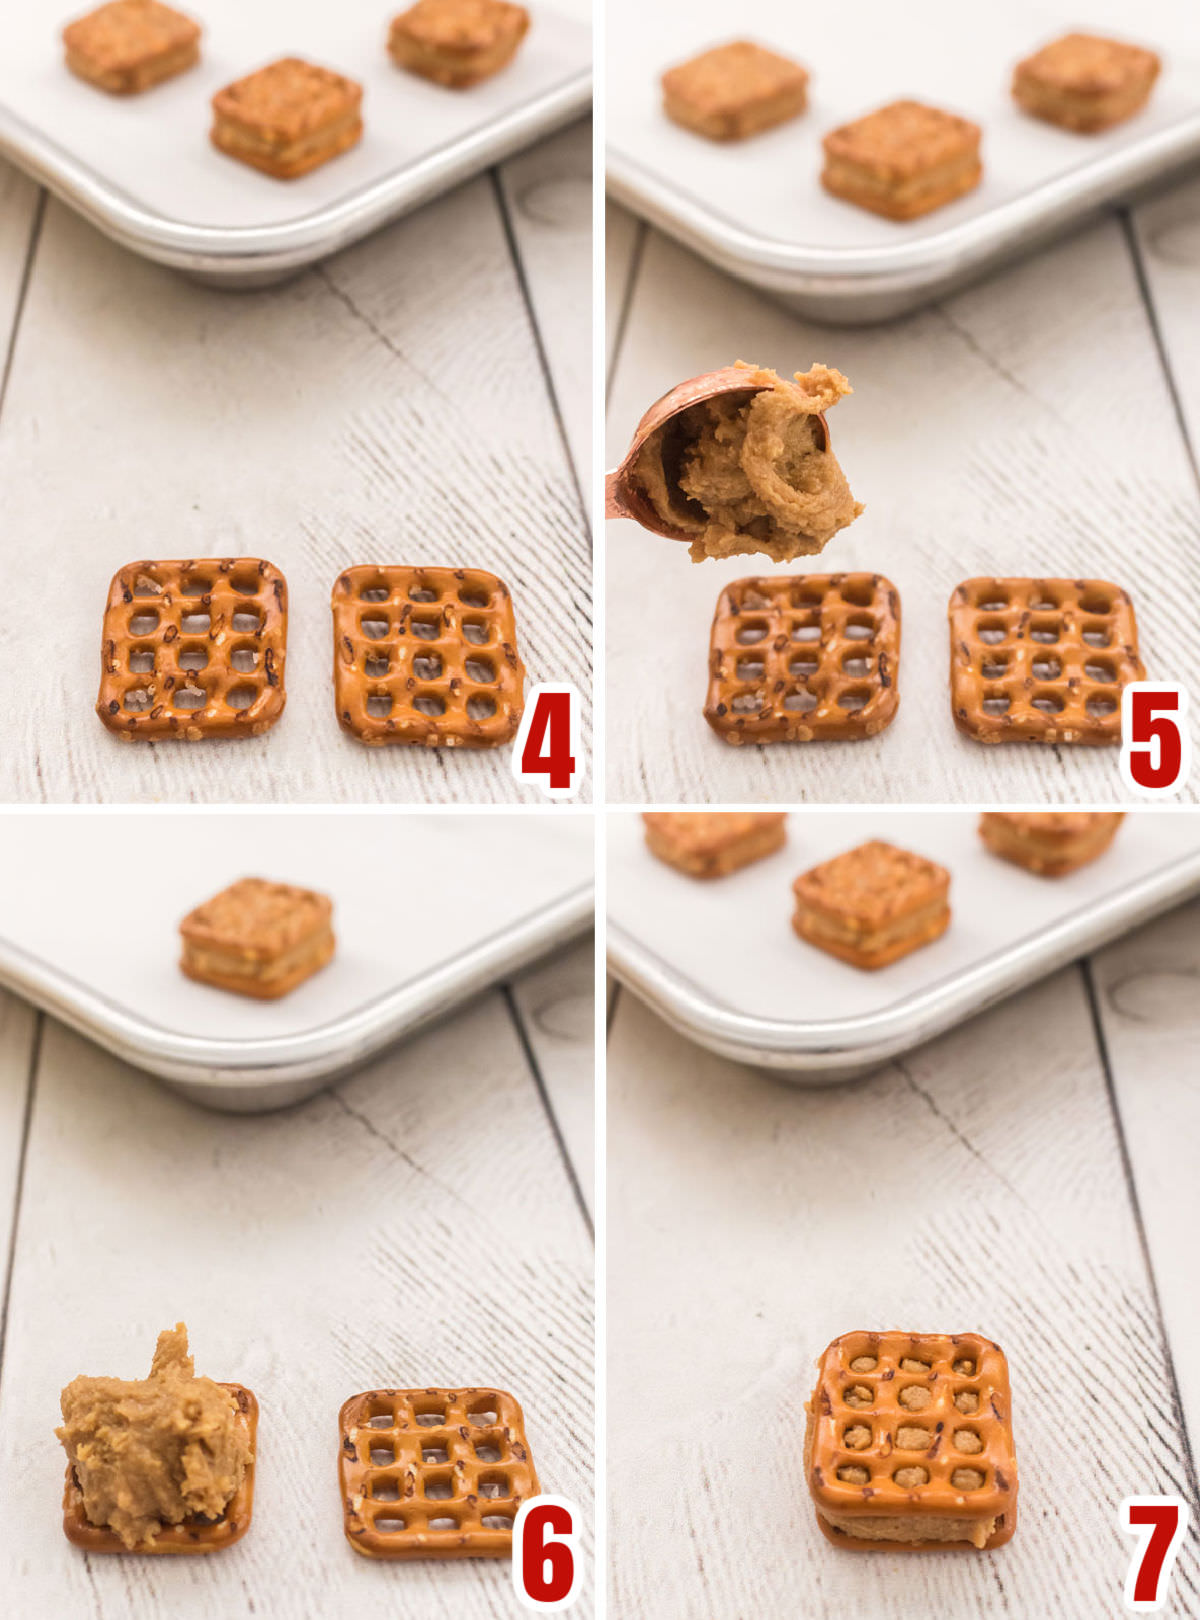 Collage image showing the steps for assembling the pretzel bites with the peanut butter filling.